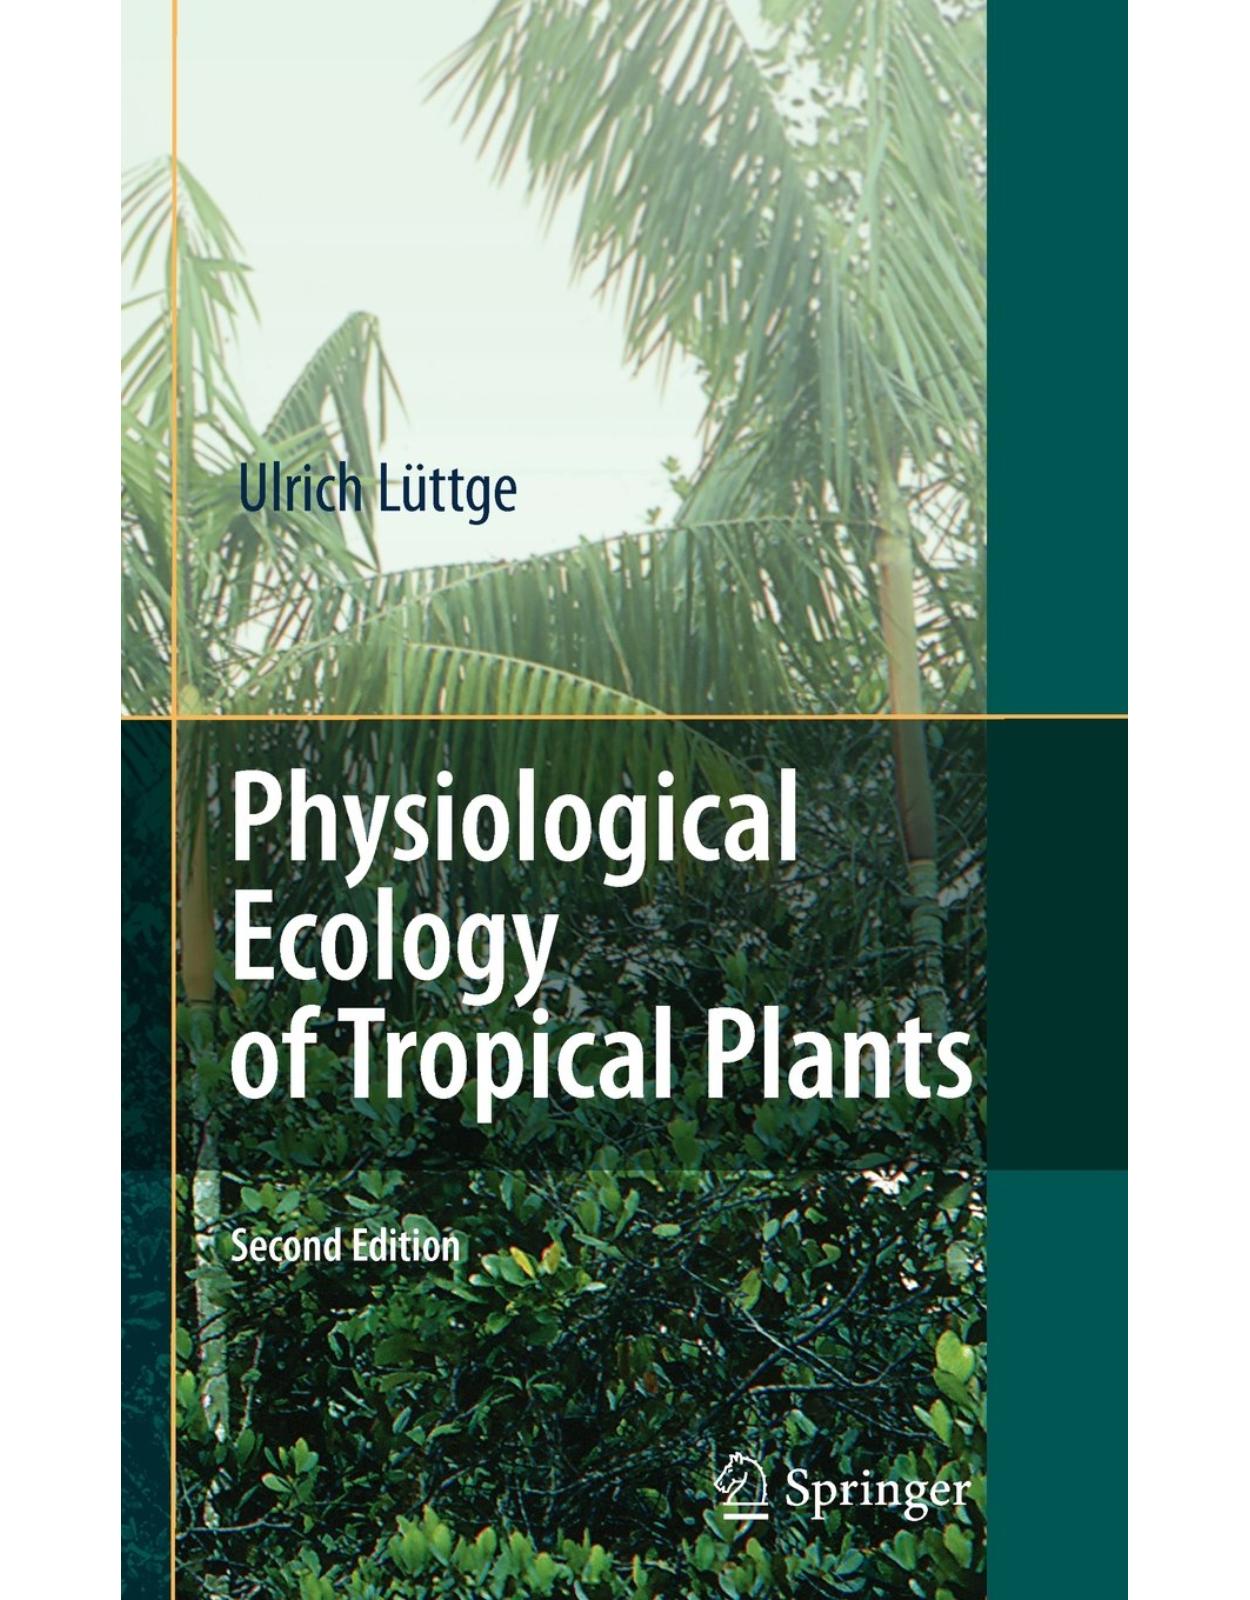 Physiological Ecology of Tropical Plants